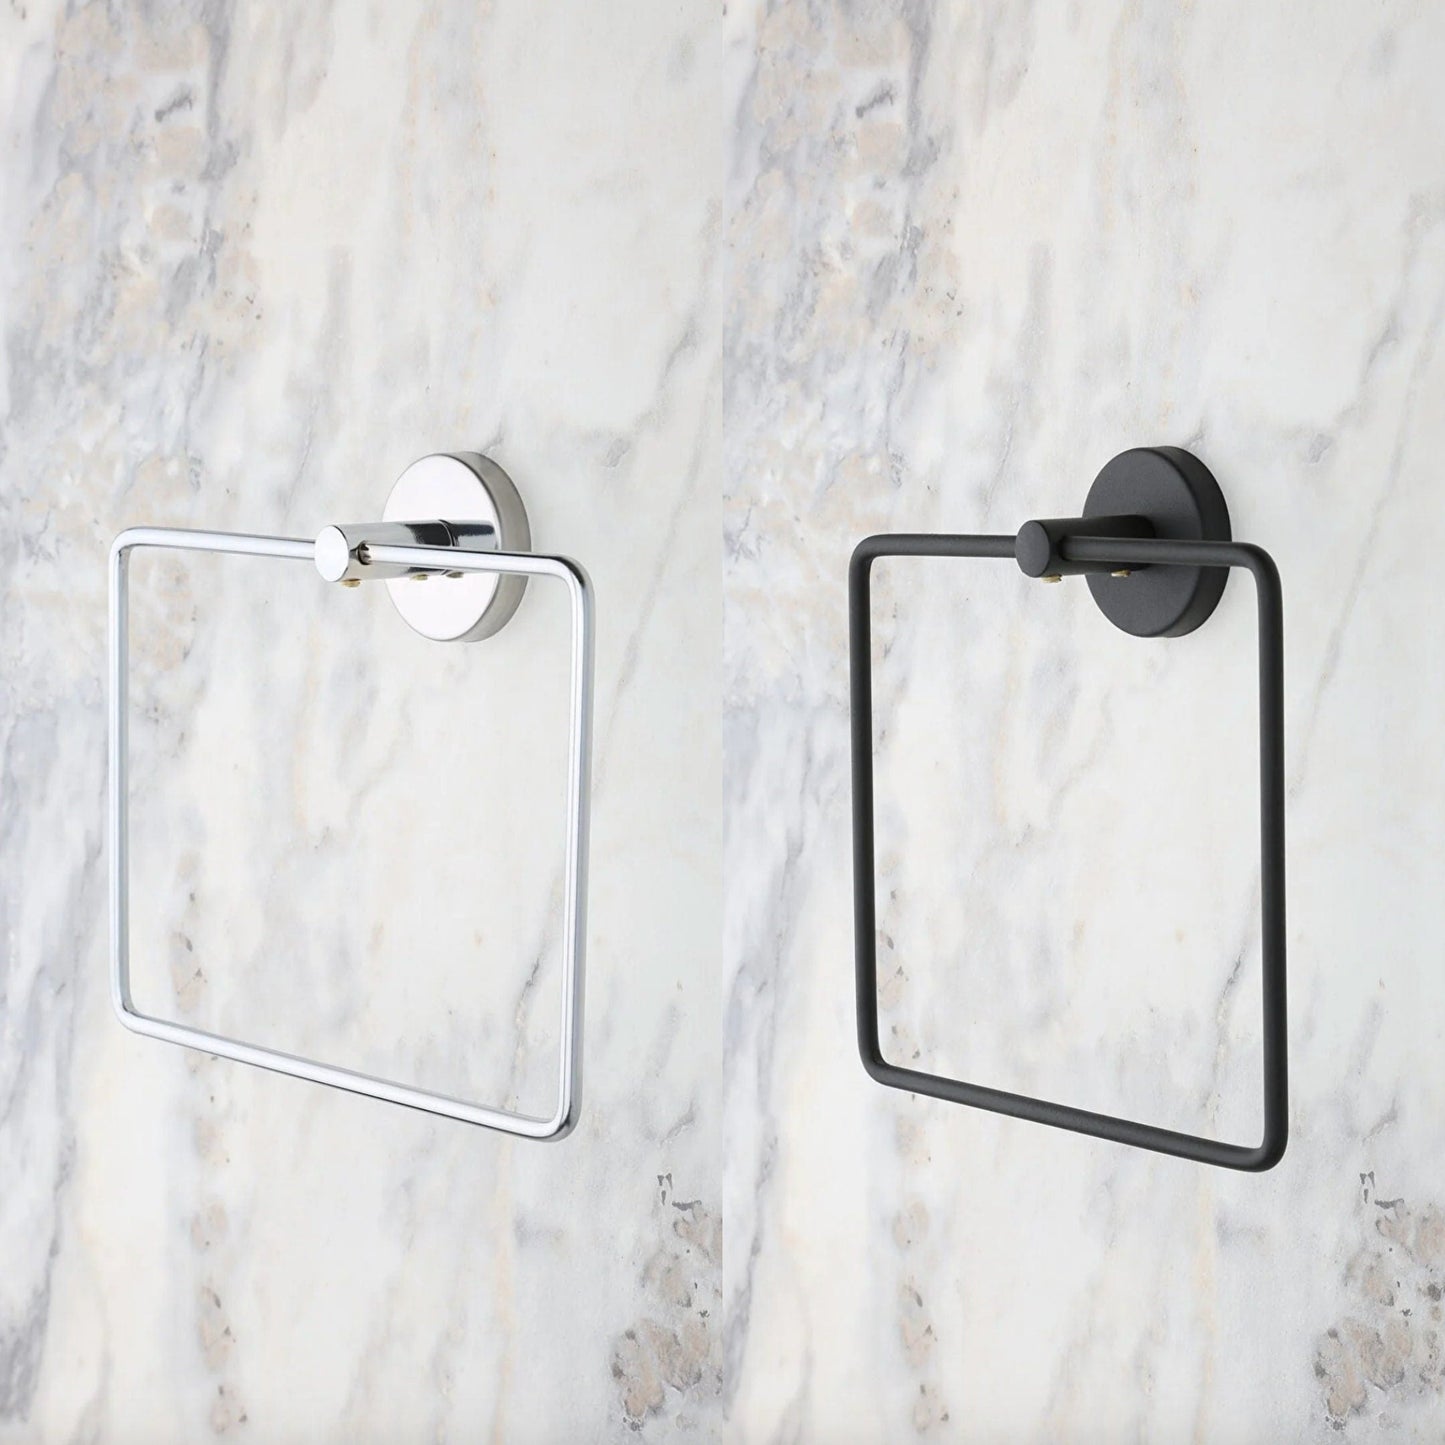 Black Towel Rail Hand Towel Holder Towel Ring Wall Mounted for Bathroom Kitchen, Square Silver Wall Mounted Towel Holder, Stainless Steel - Babila Home